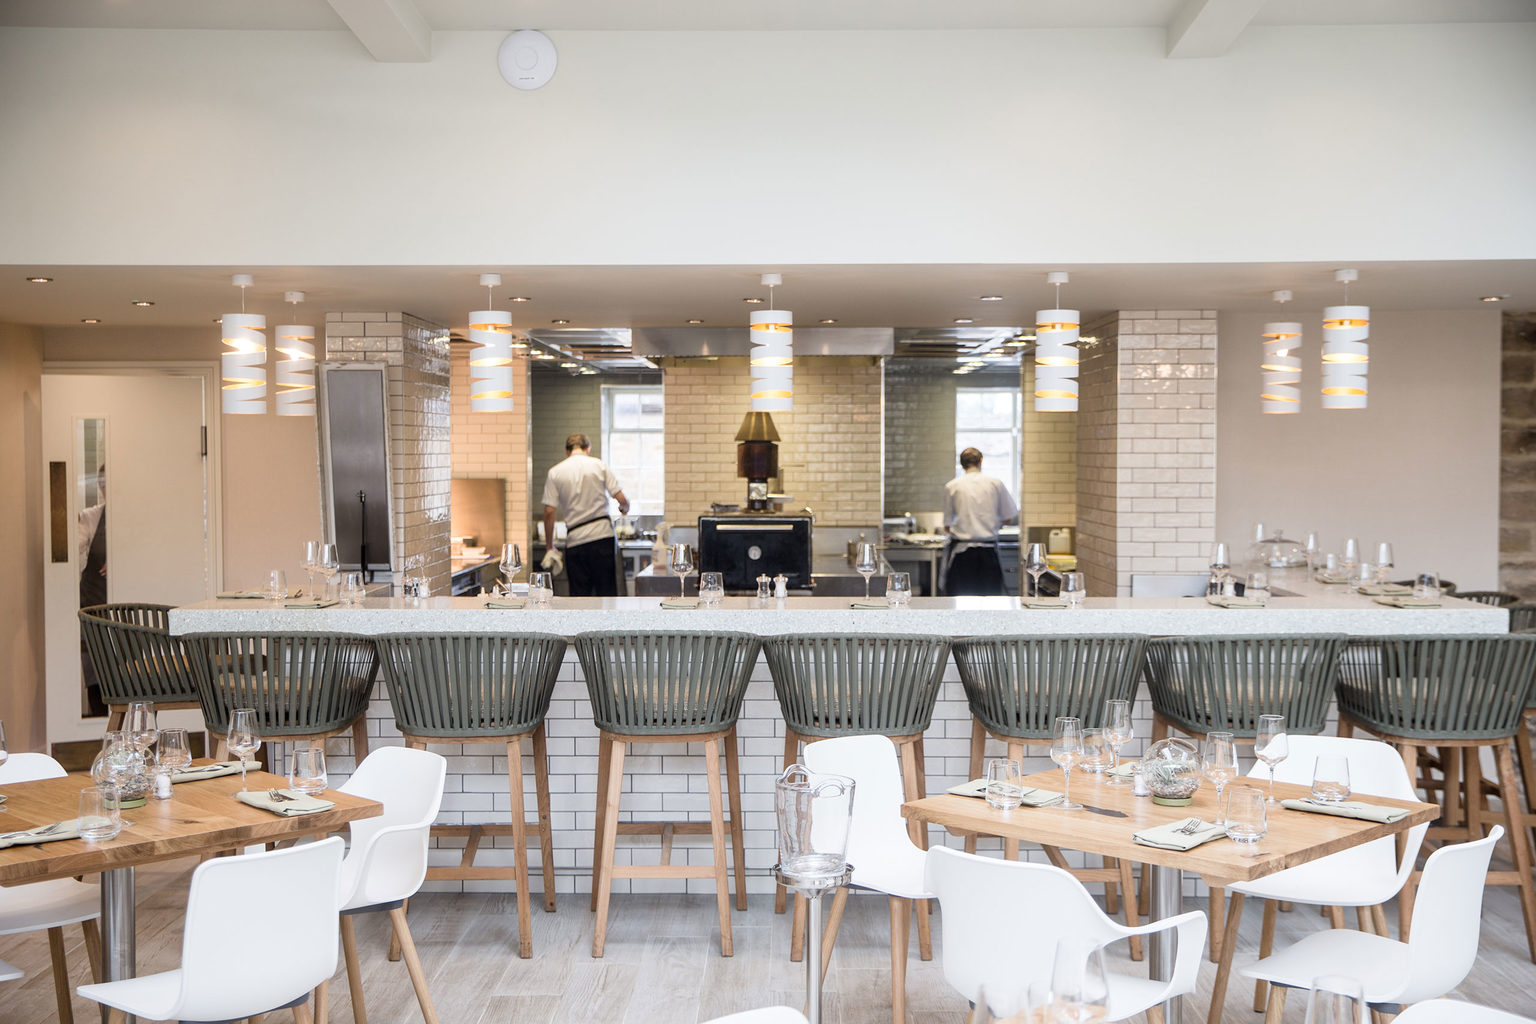 The open kitchen at The Terrace Restaurant and Bar on the Swinton Estate in North Yorkshire.